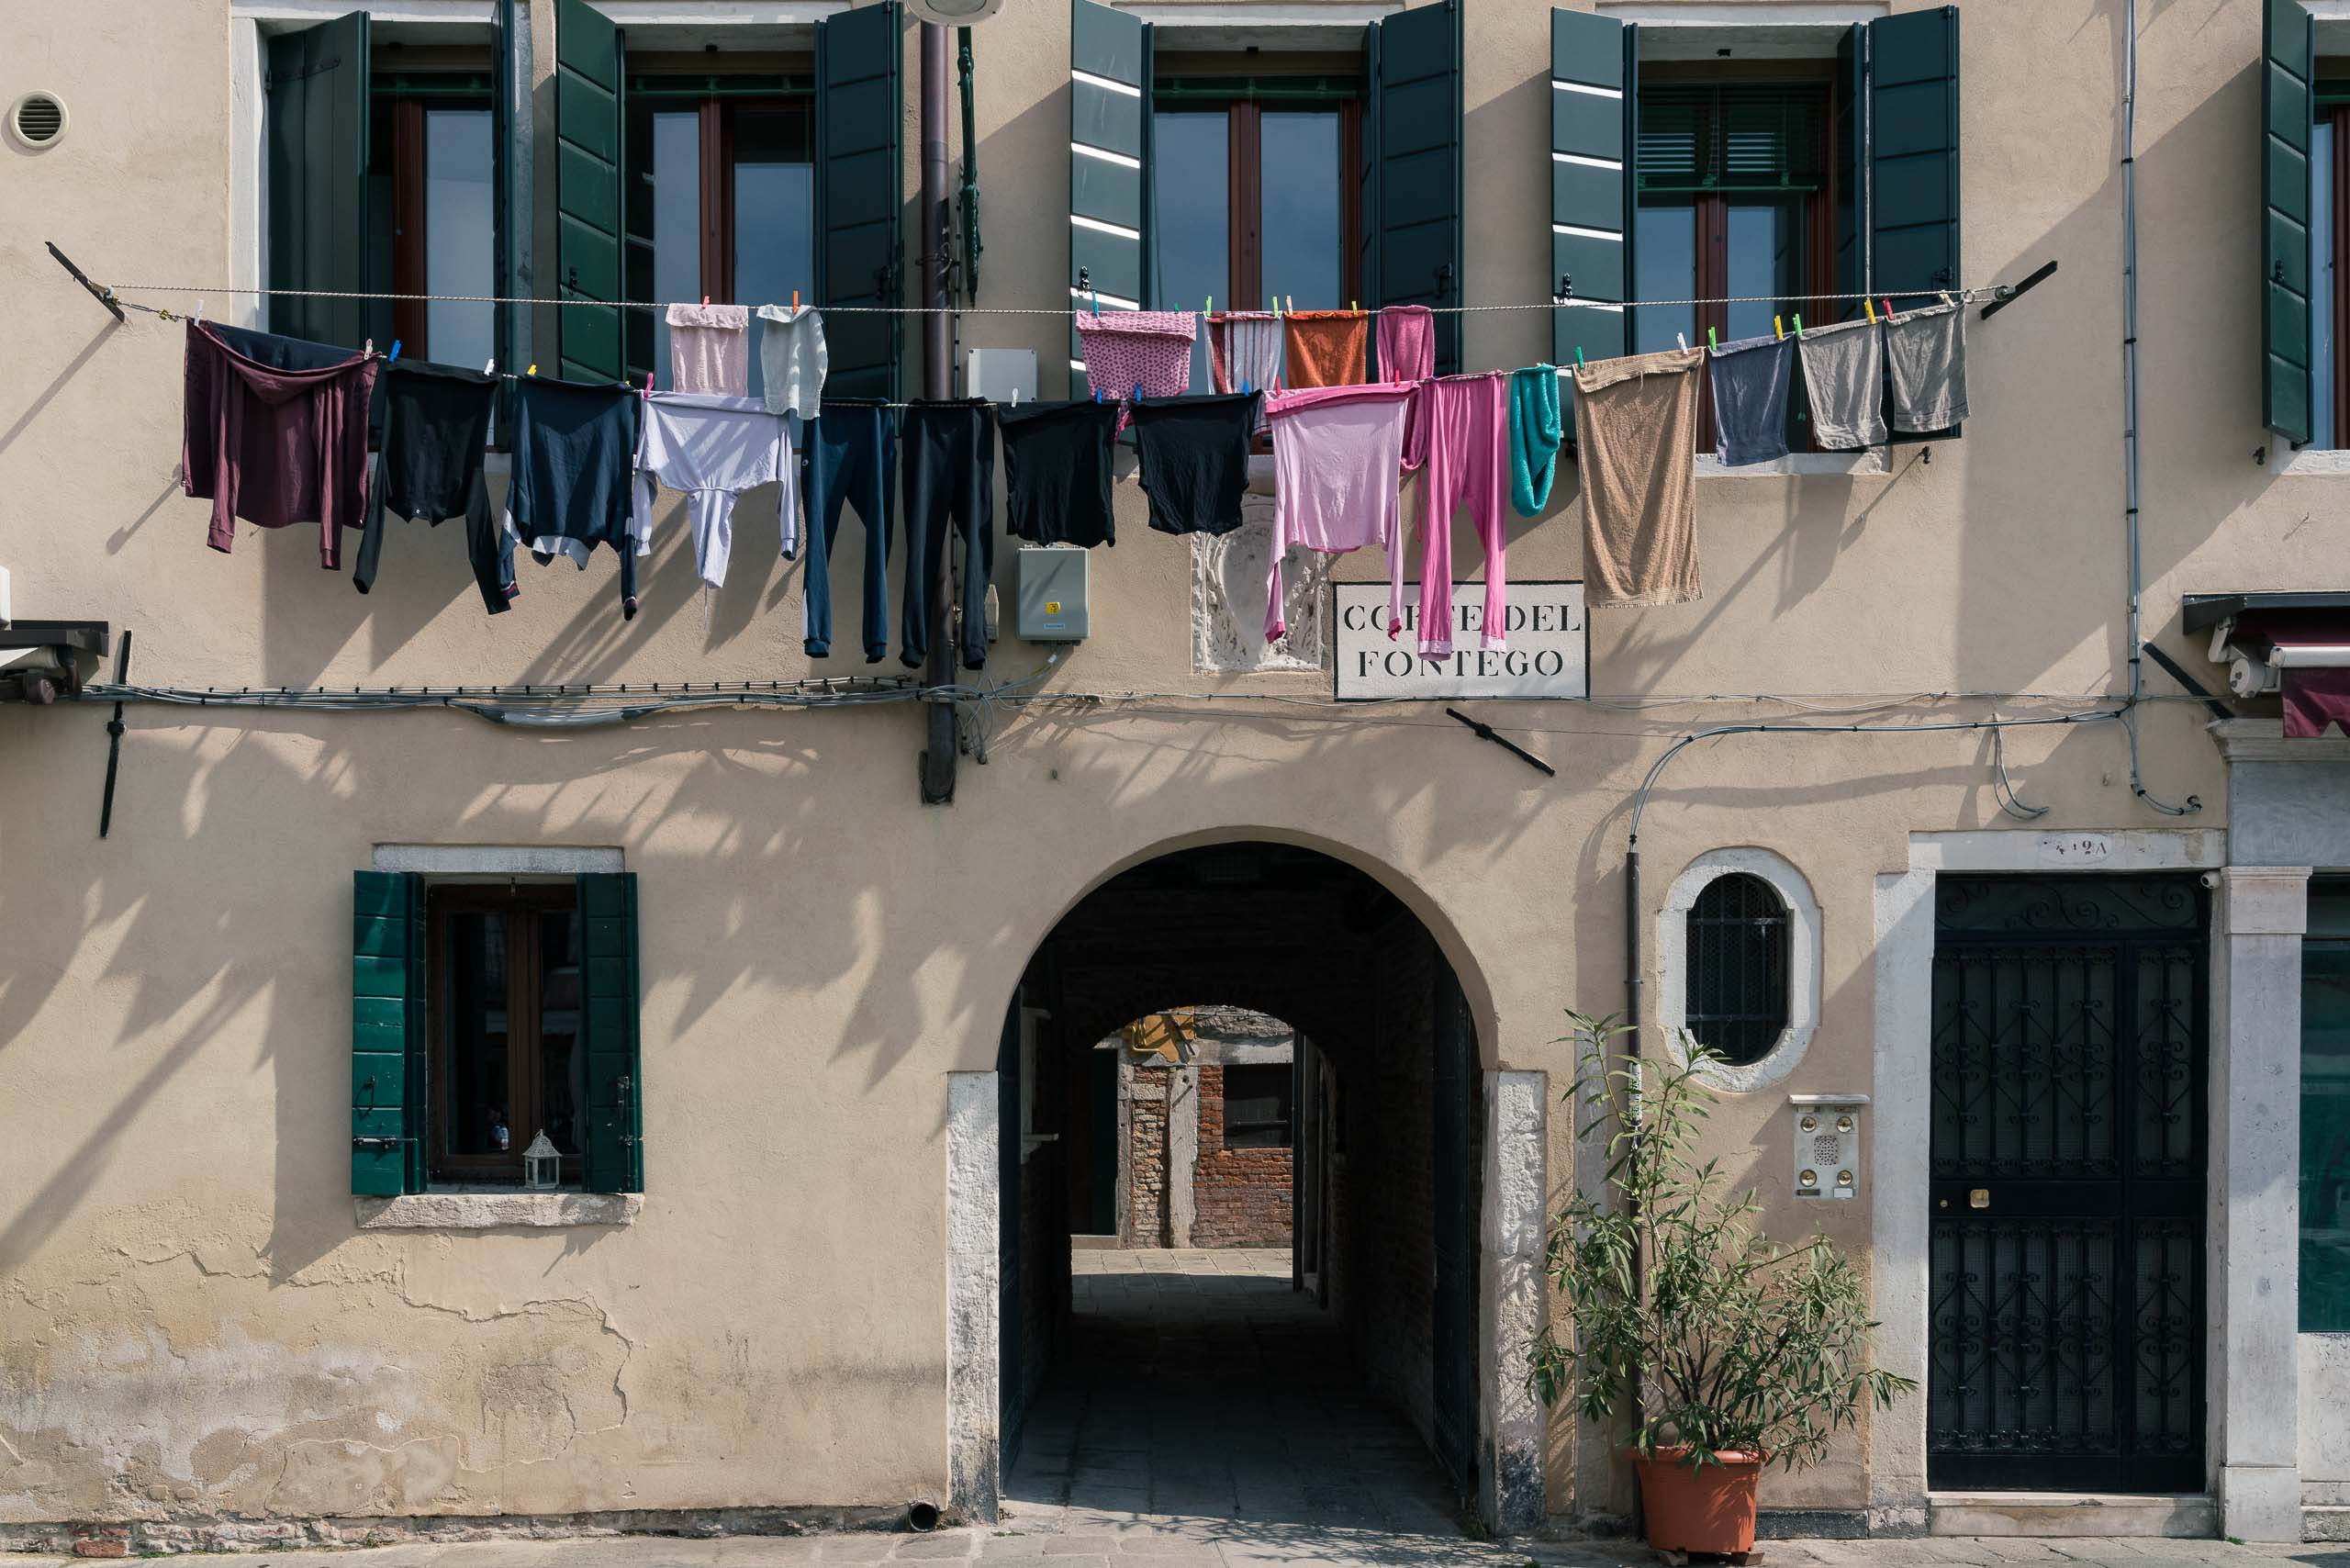 Fine Art and travel photography of the back streets of Venice Veneto Italy made by New York photographer Mary Catherine Messner (mcmessner).